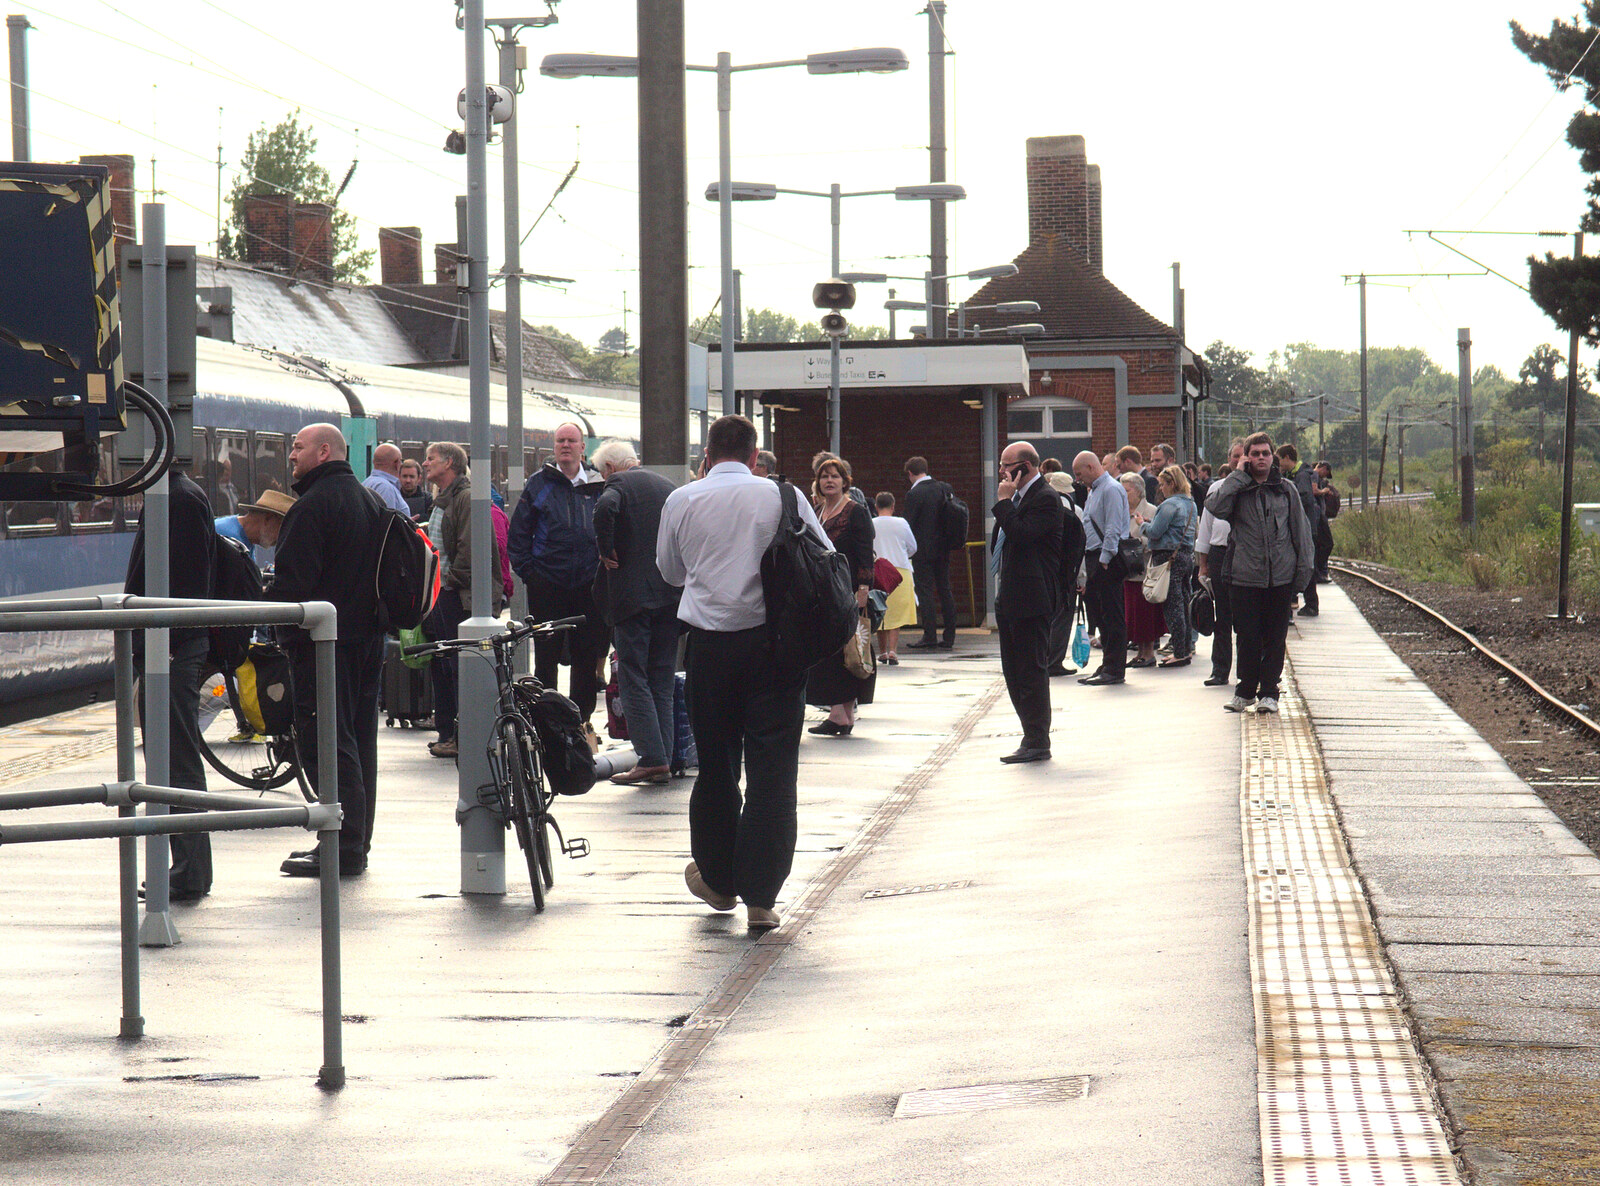 More hanging around at Manningtree Station from Train Fails, and Pizza Pub, Manningtree and Southwark - 12th August 2014